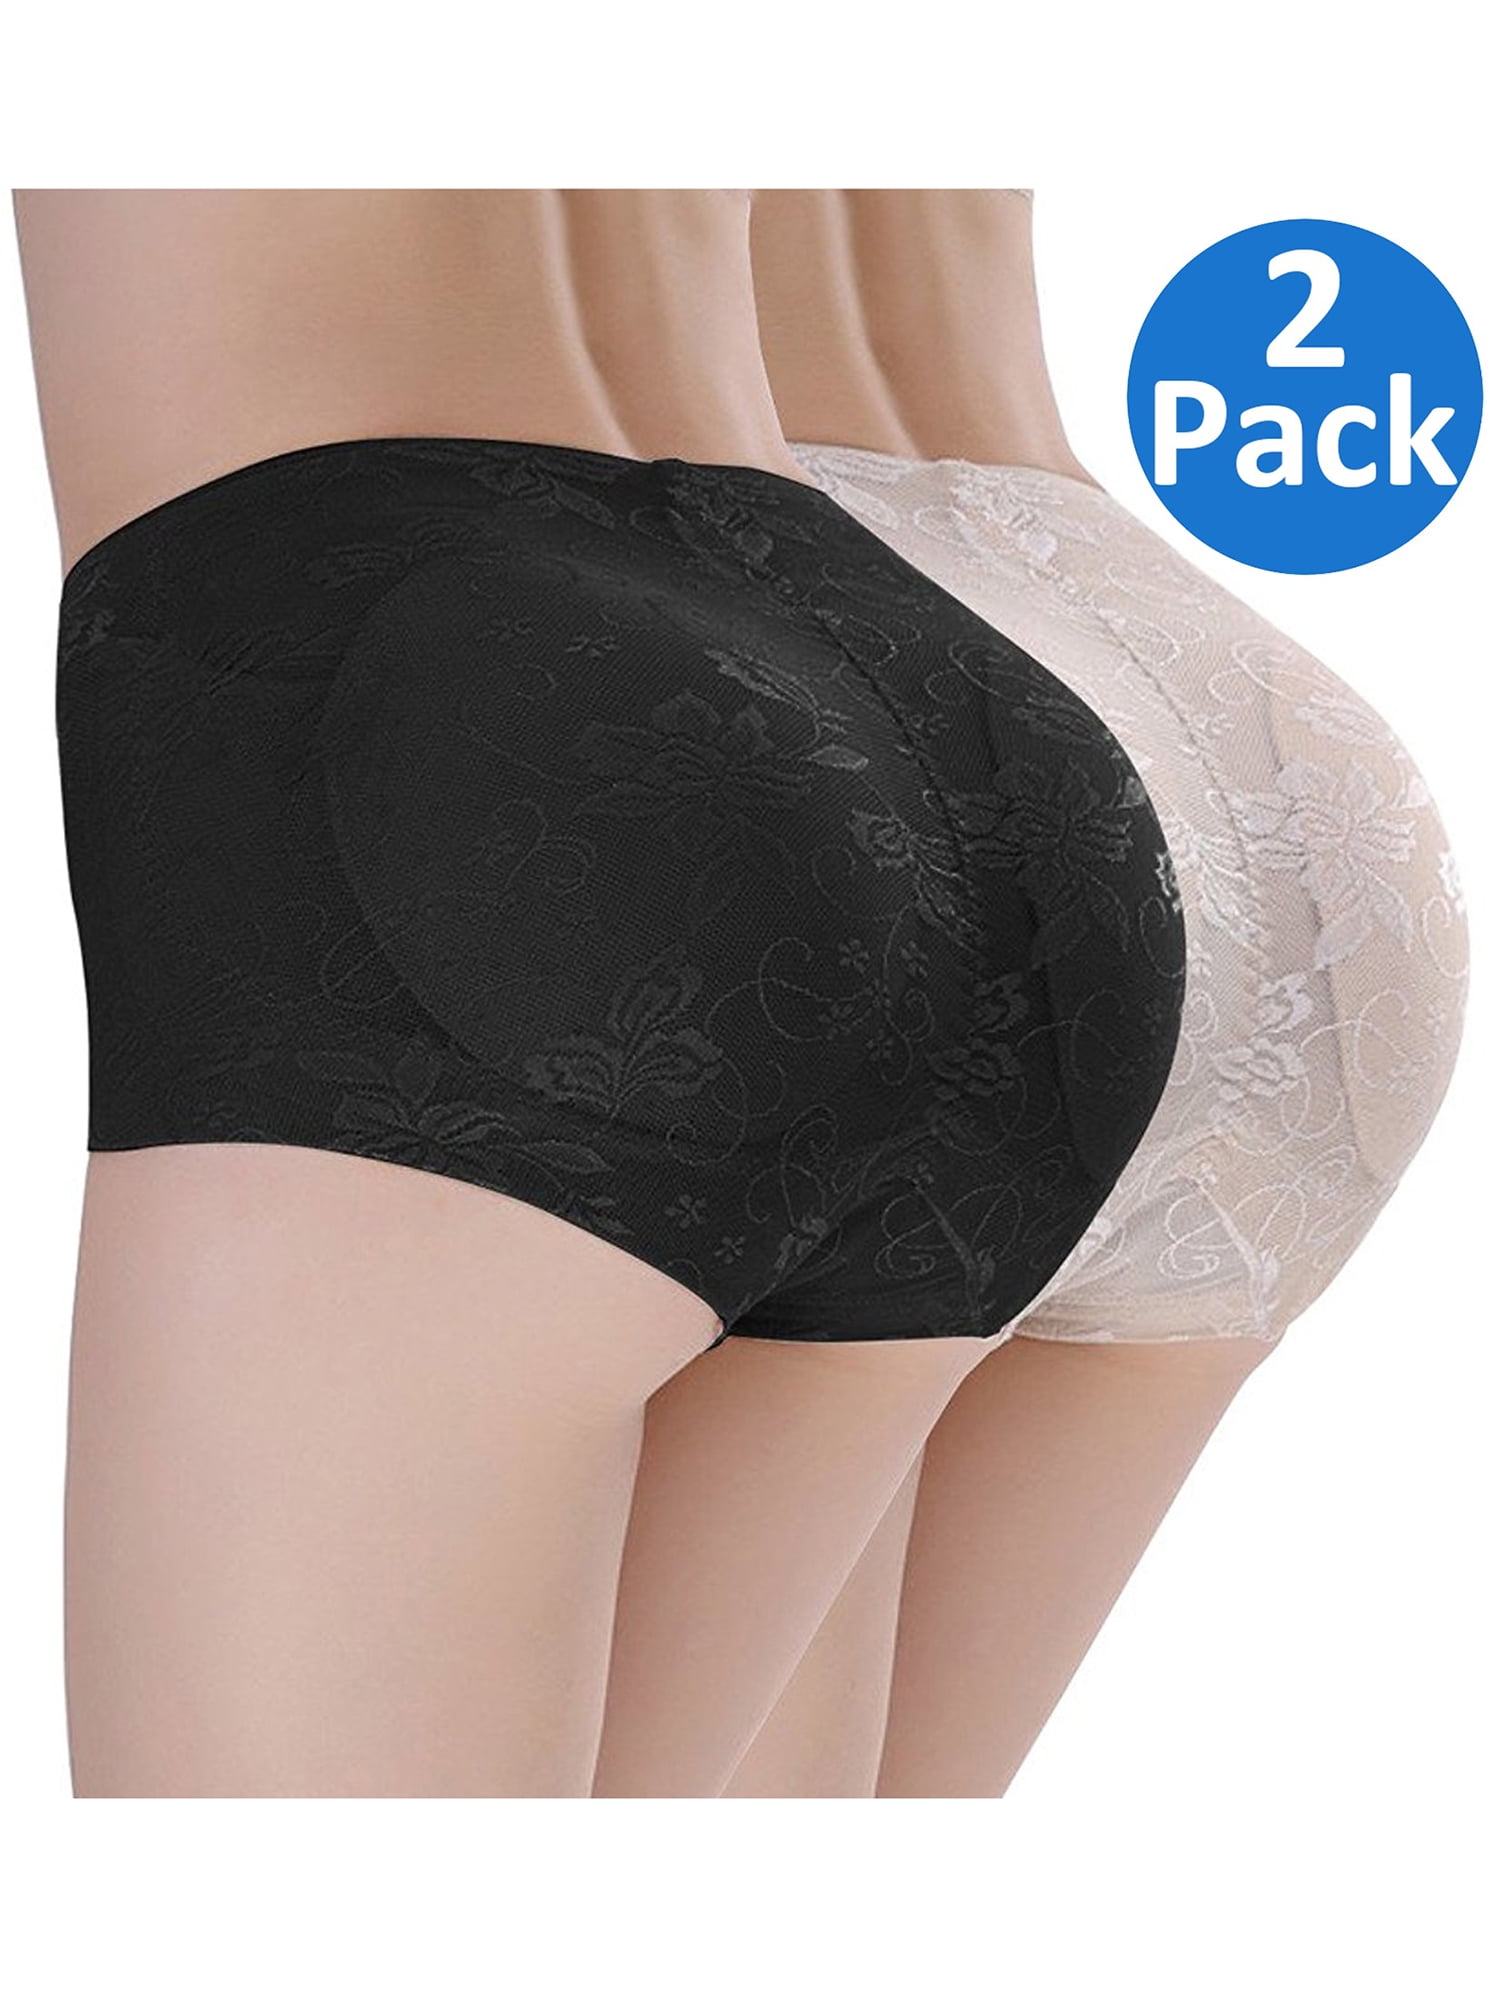 Body Beautiful Womens 2 Pack Body Slip with Butt Support in New Light Weight Hi Tension Yarn for Excellent Slimming. 